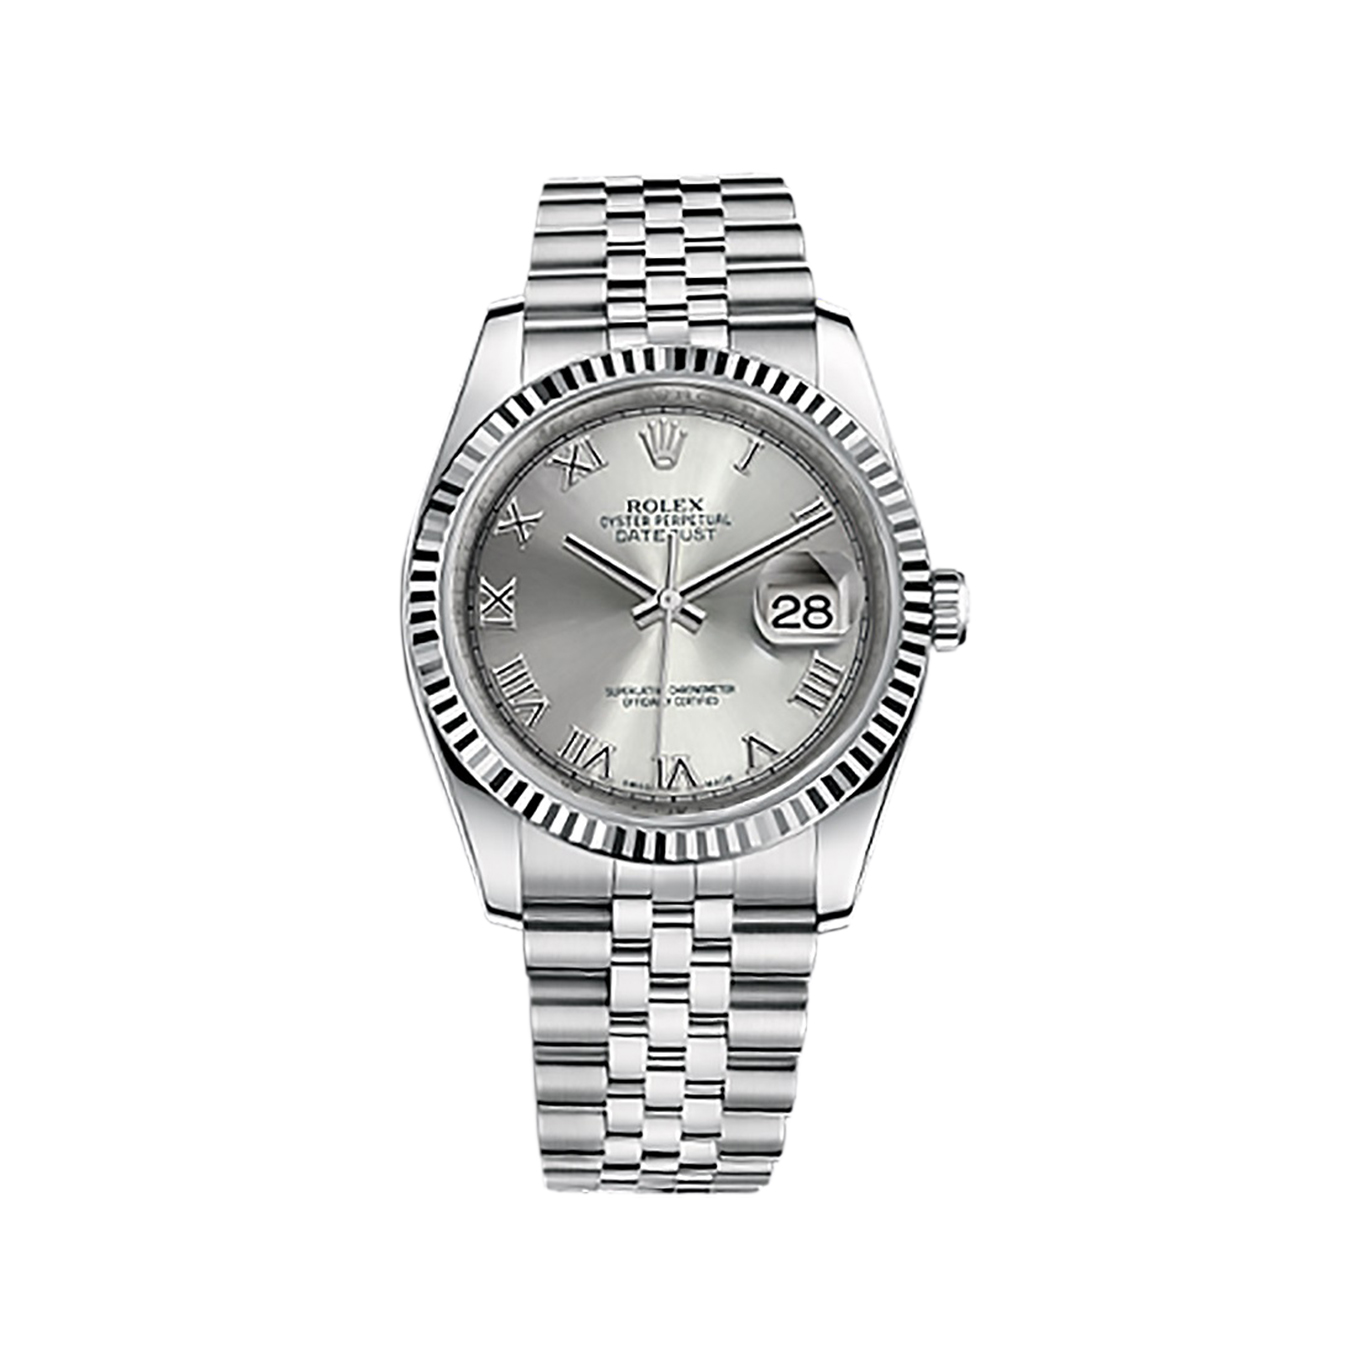 Datejust 36 116234 White Gold & Stainless Steel Watch (Rhodium) - Click Image to Close